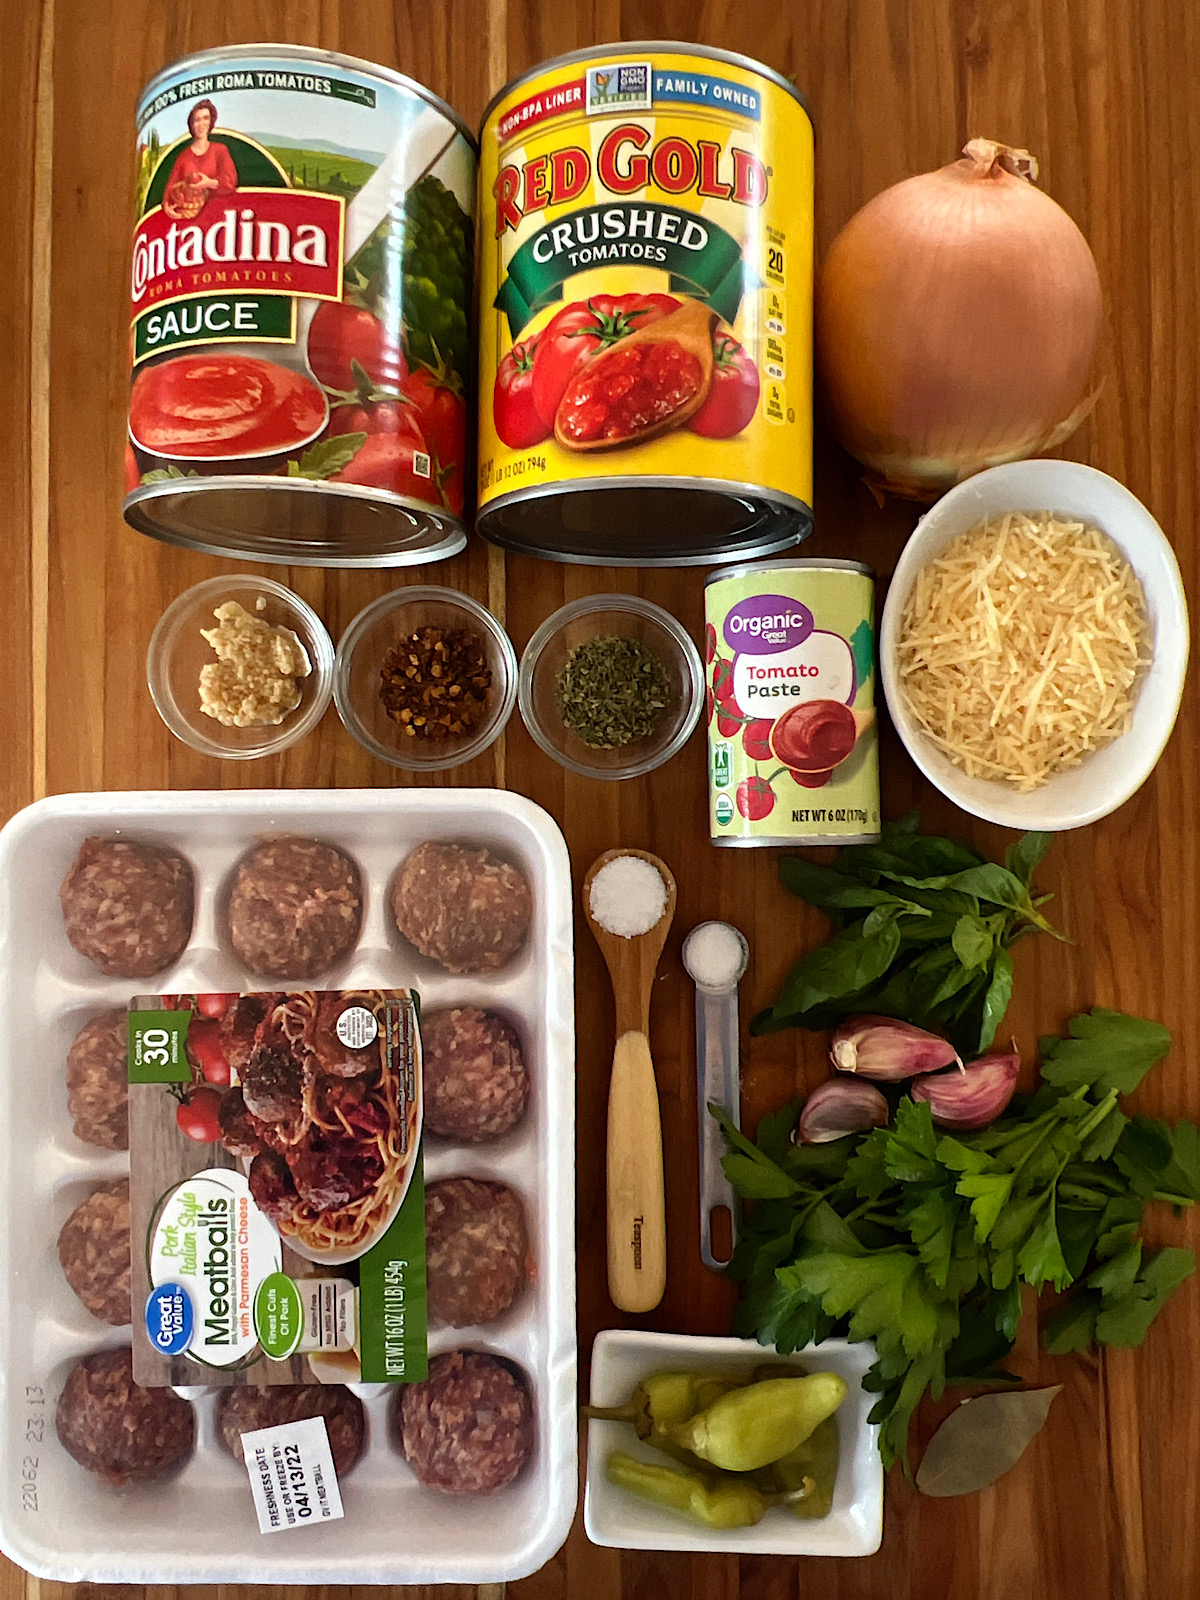 Ingredients for low carb Winter spaghetti and meatballs.